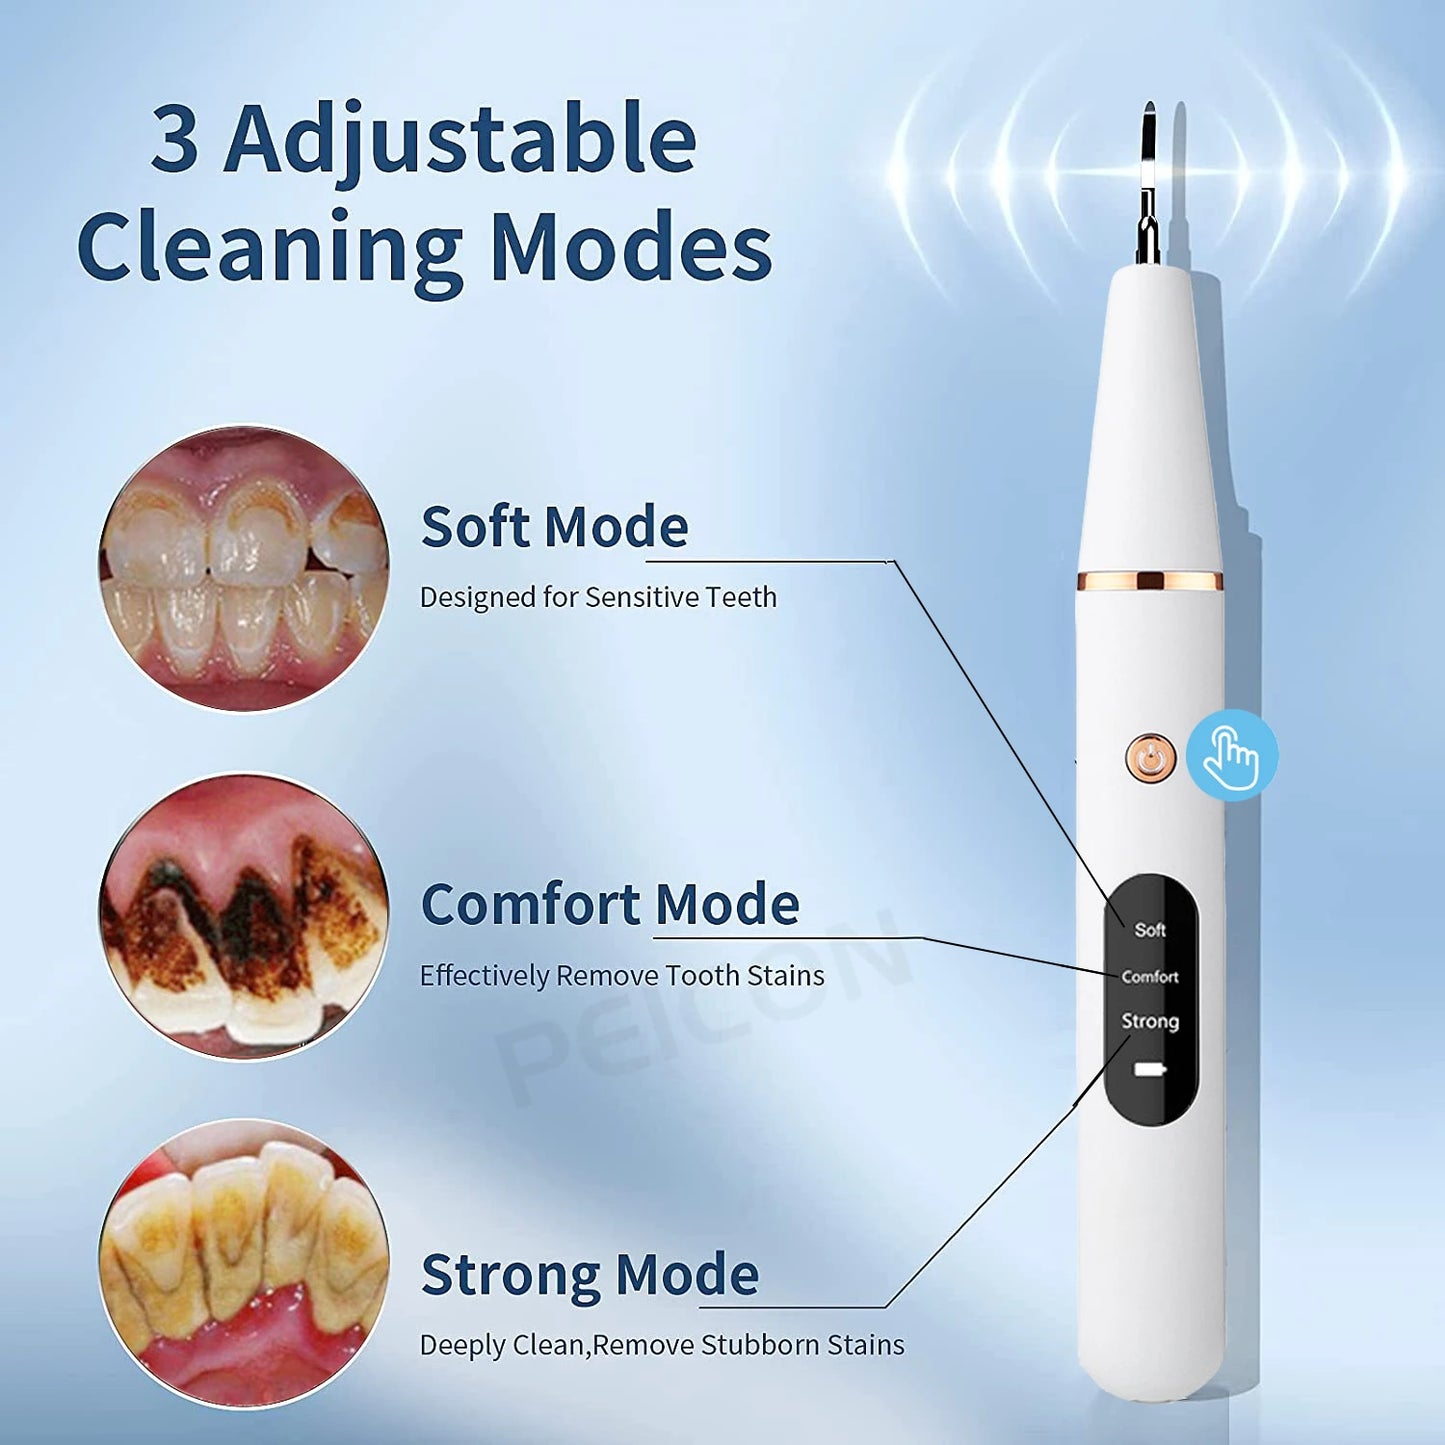 Ultrasonic Dental Scaler For Effective Teeth Cleaning - Electric Sonic Plaque Remover, Tartar Removal, Dental Stone Cleaner. Limited Stock!